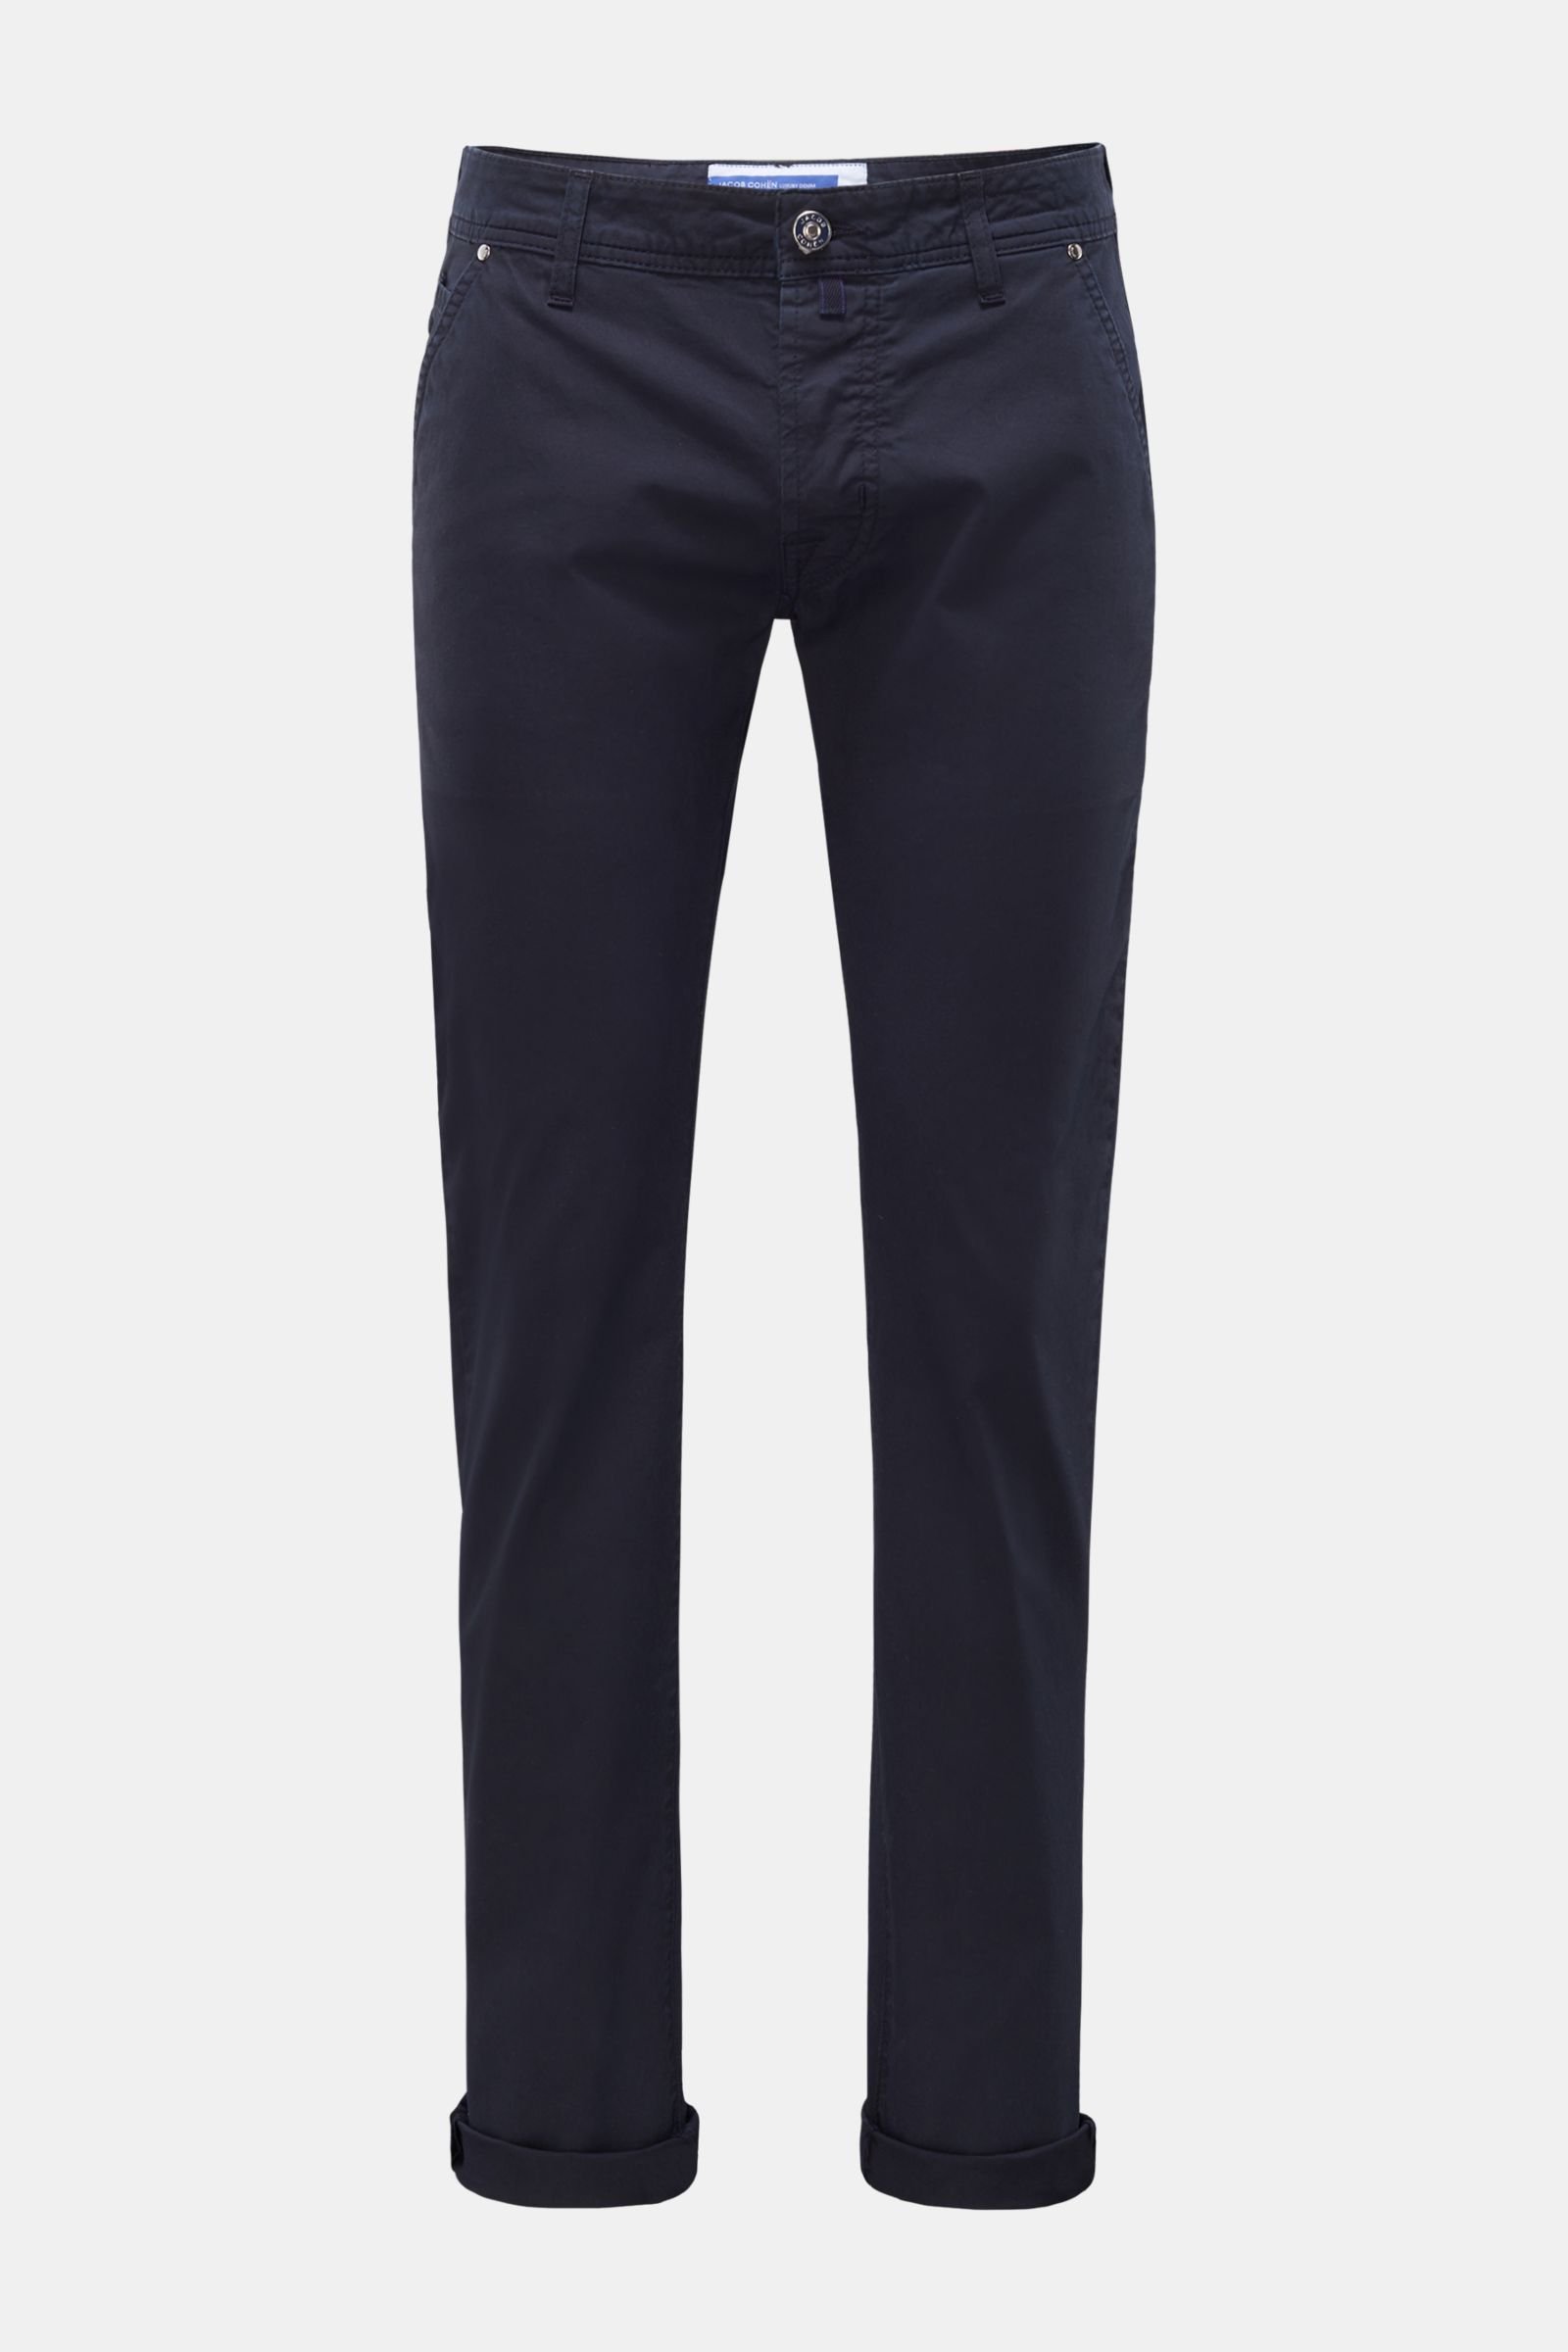 'Leonard' cotton trousers navy (previously J613)